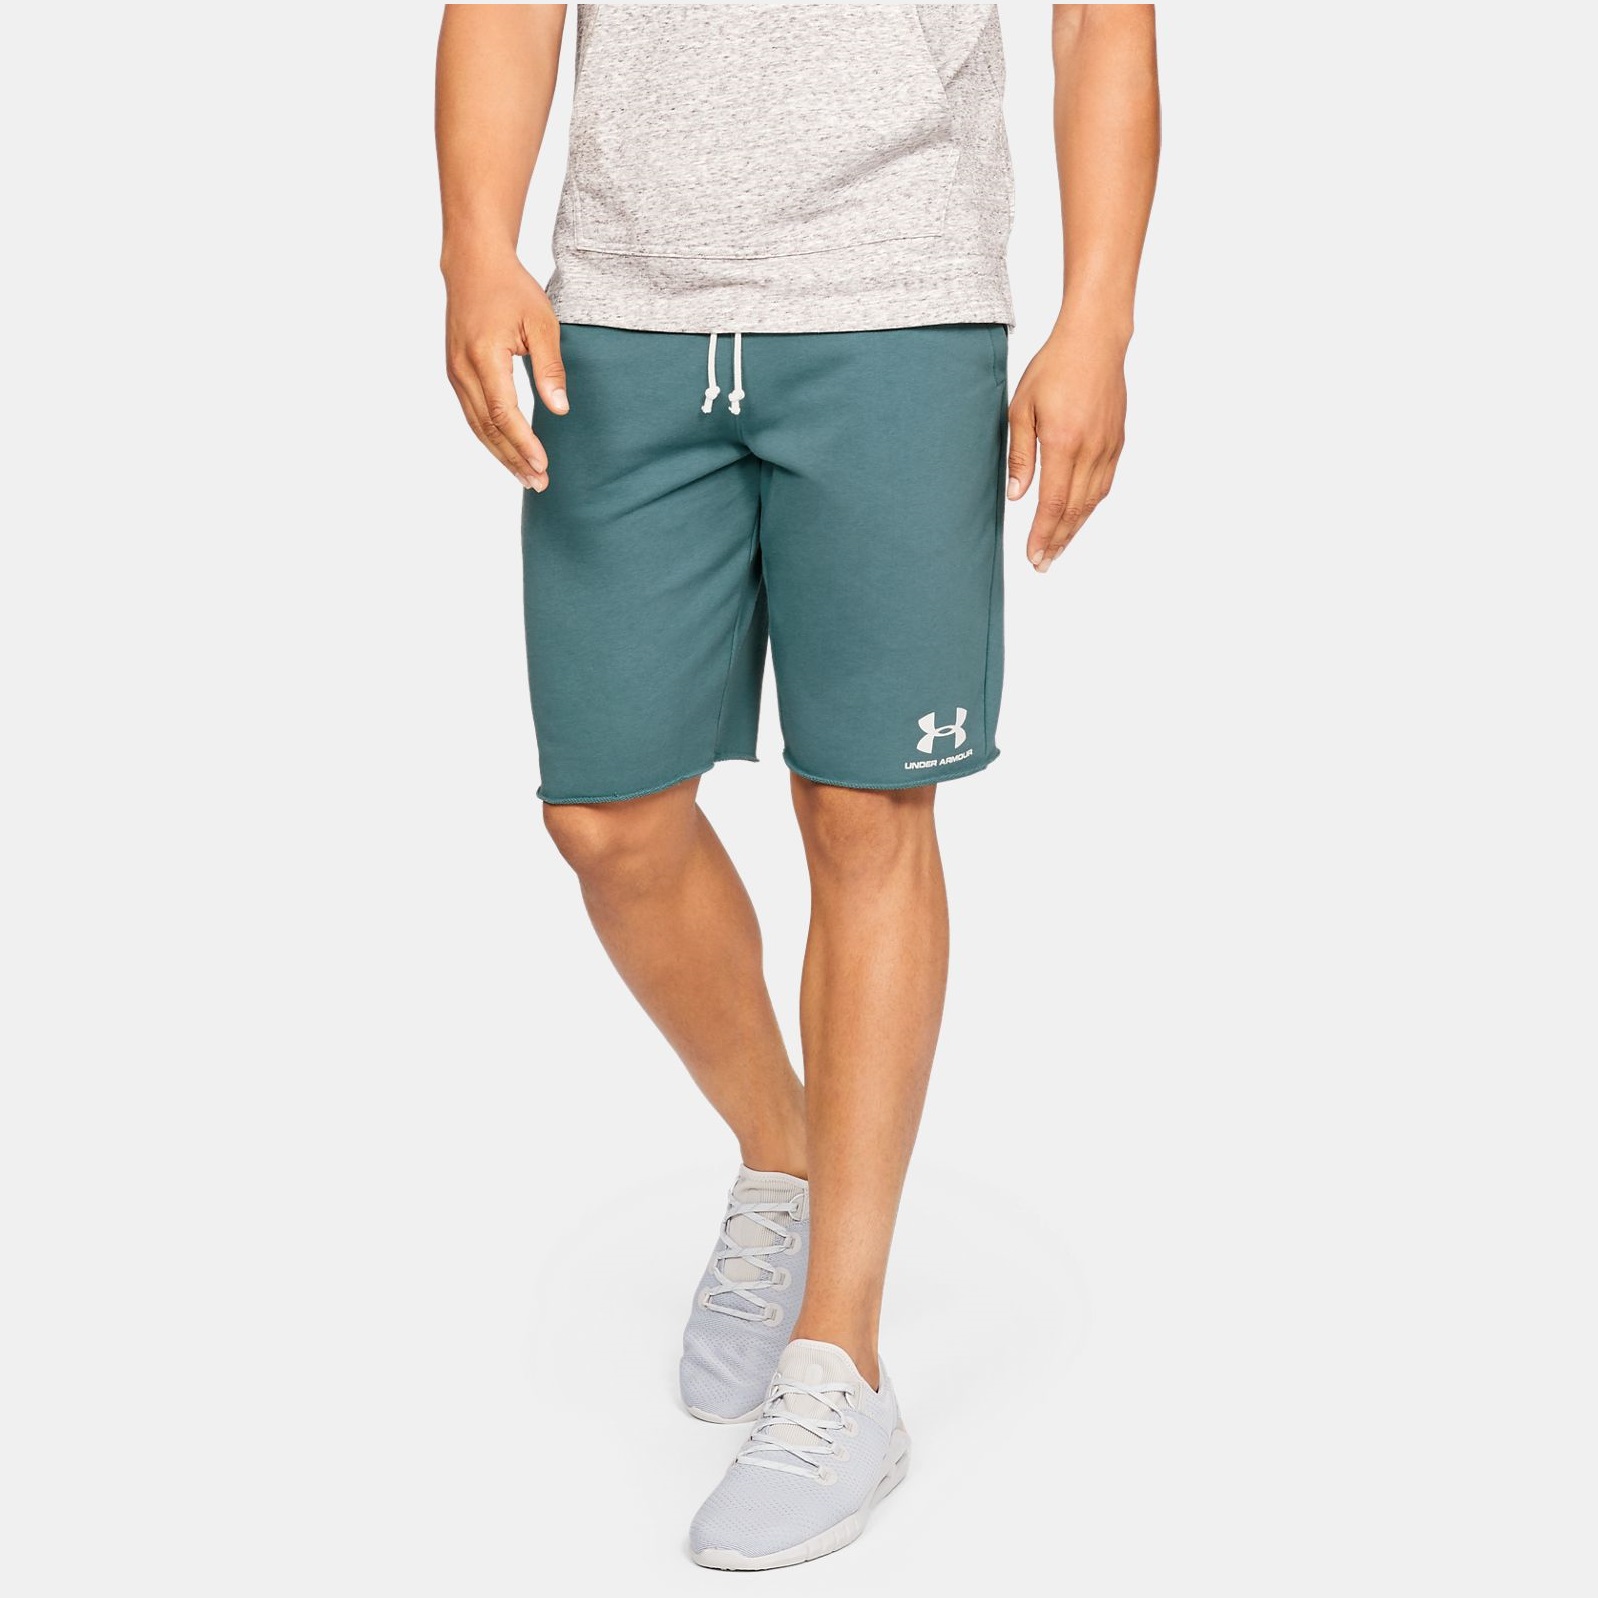  -  under armour UA Sportstyle Terry Shorts 9288